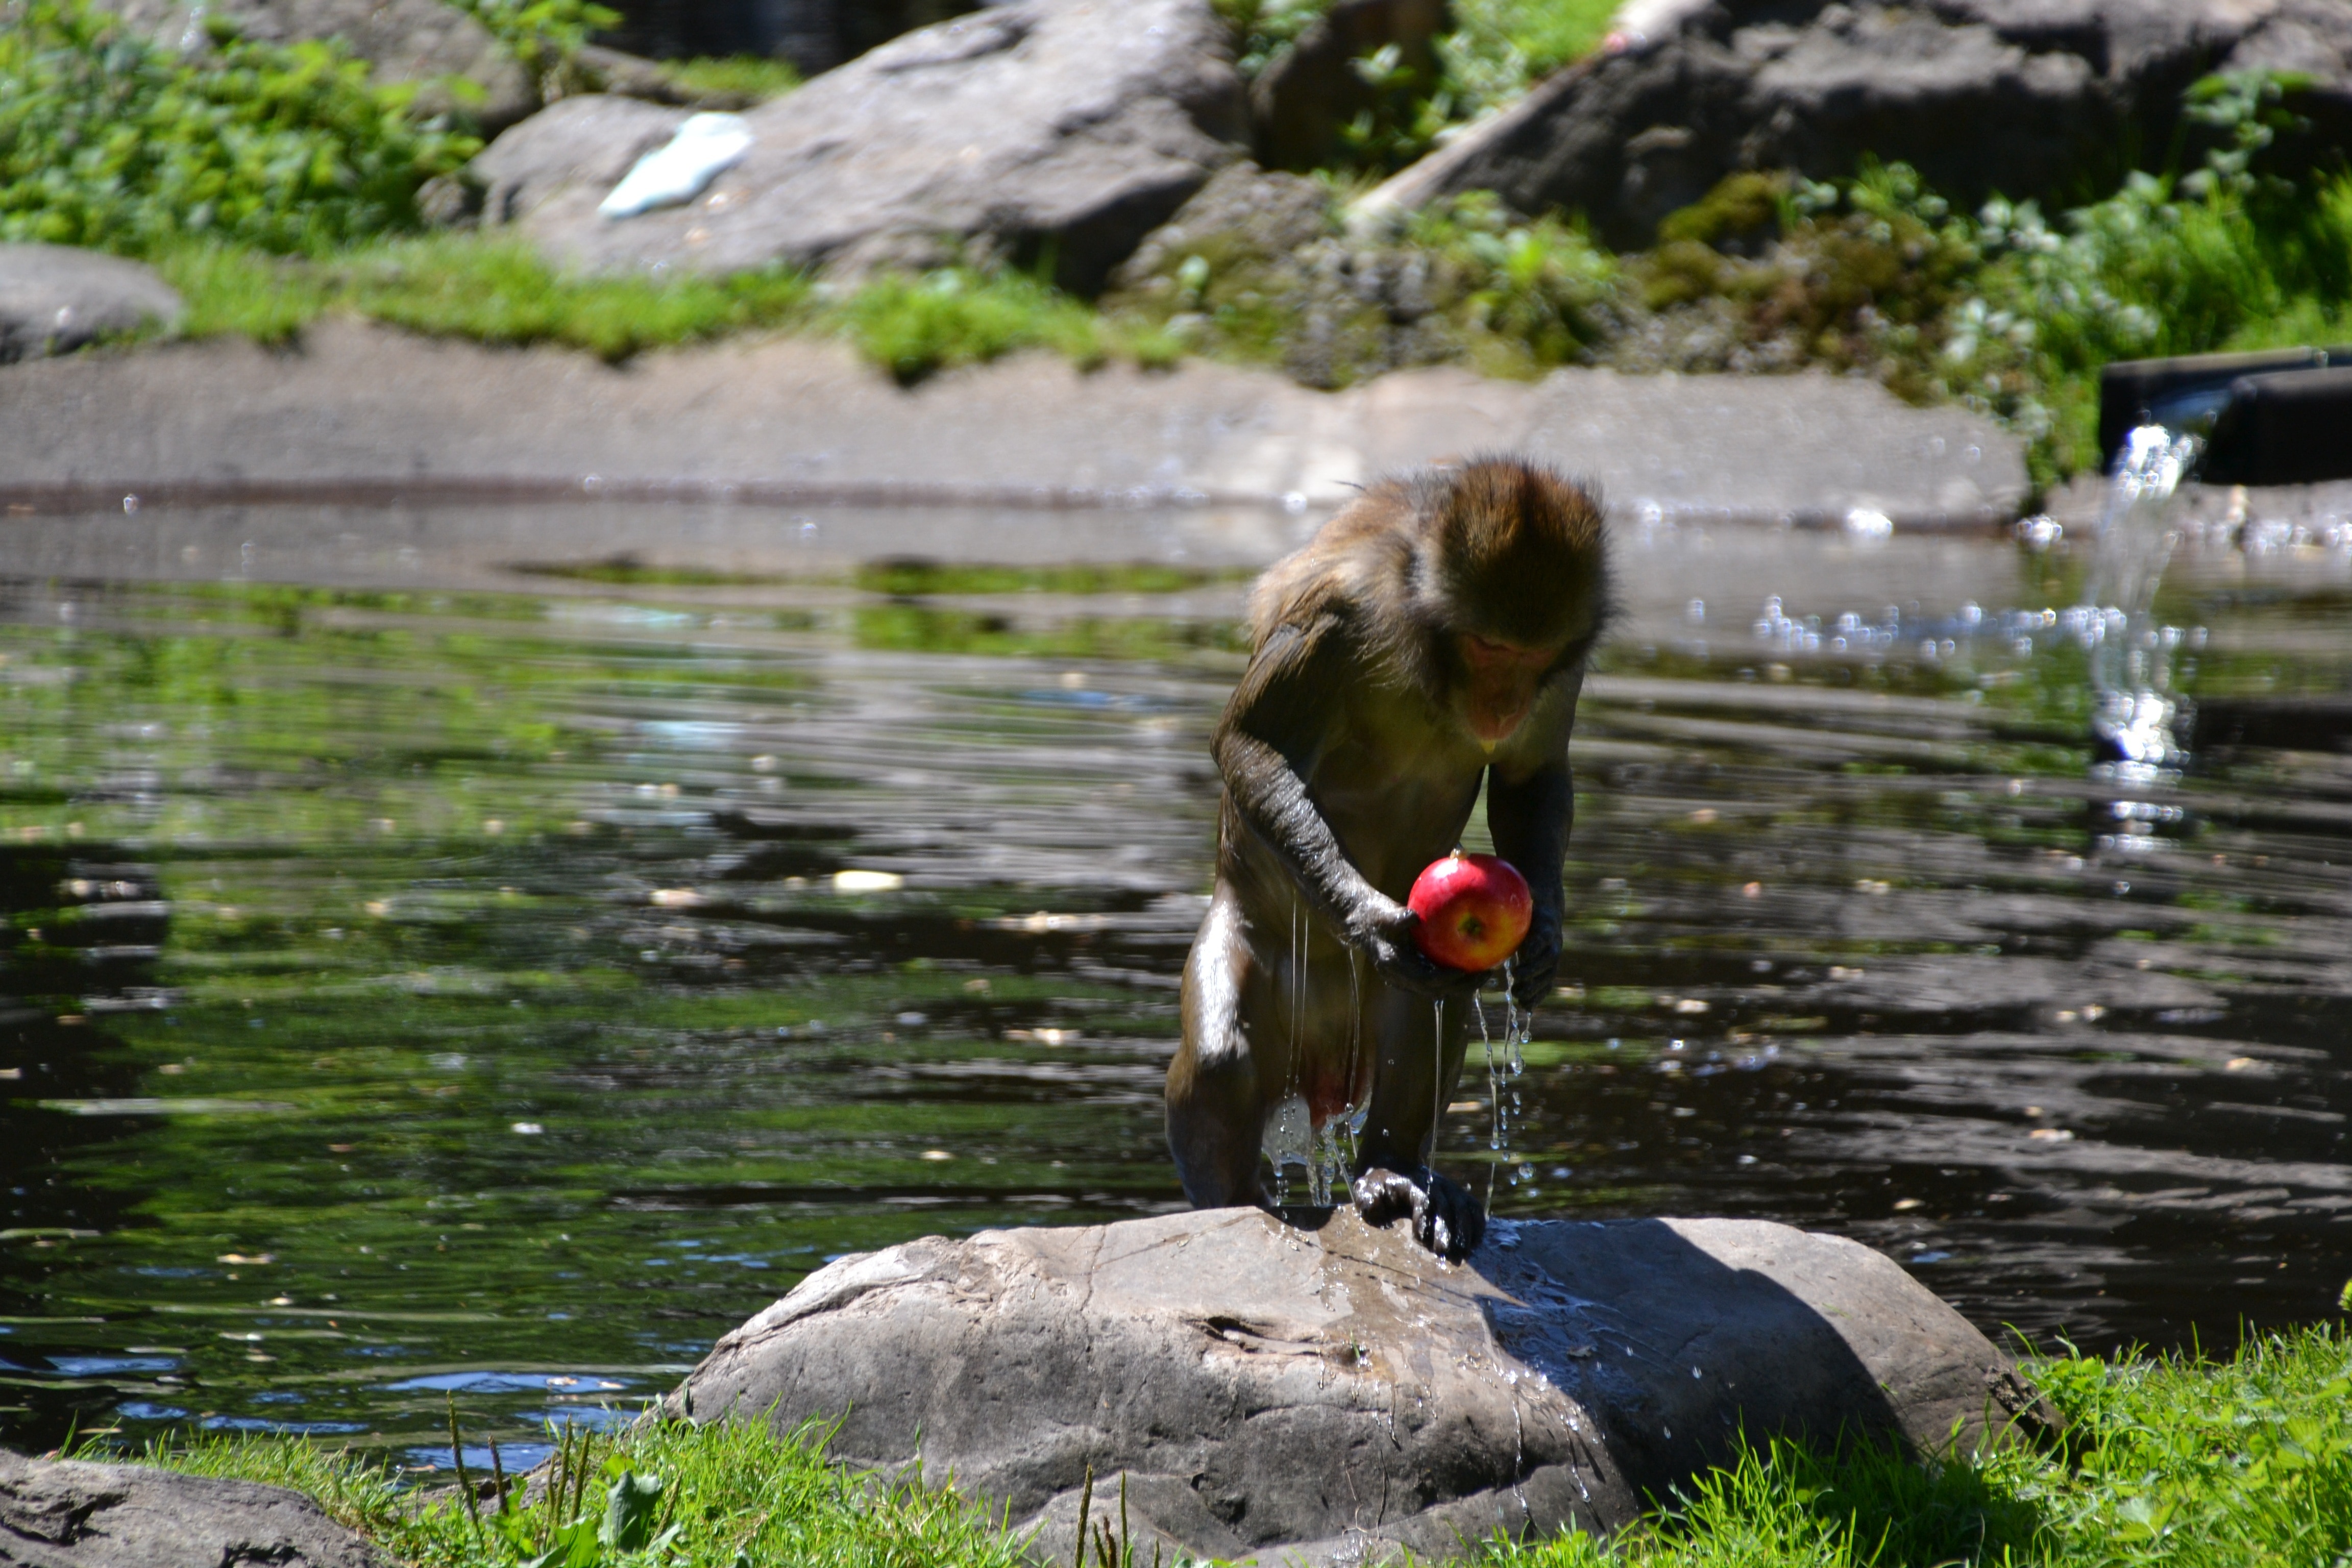 monkey holding apple in river near rock at daytime